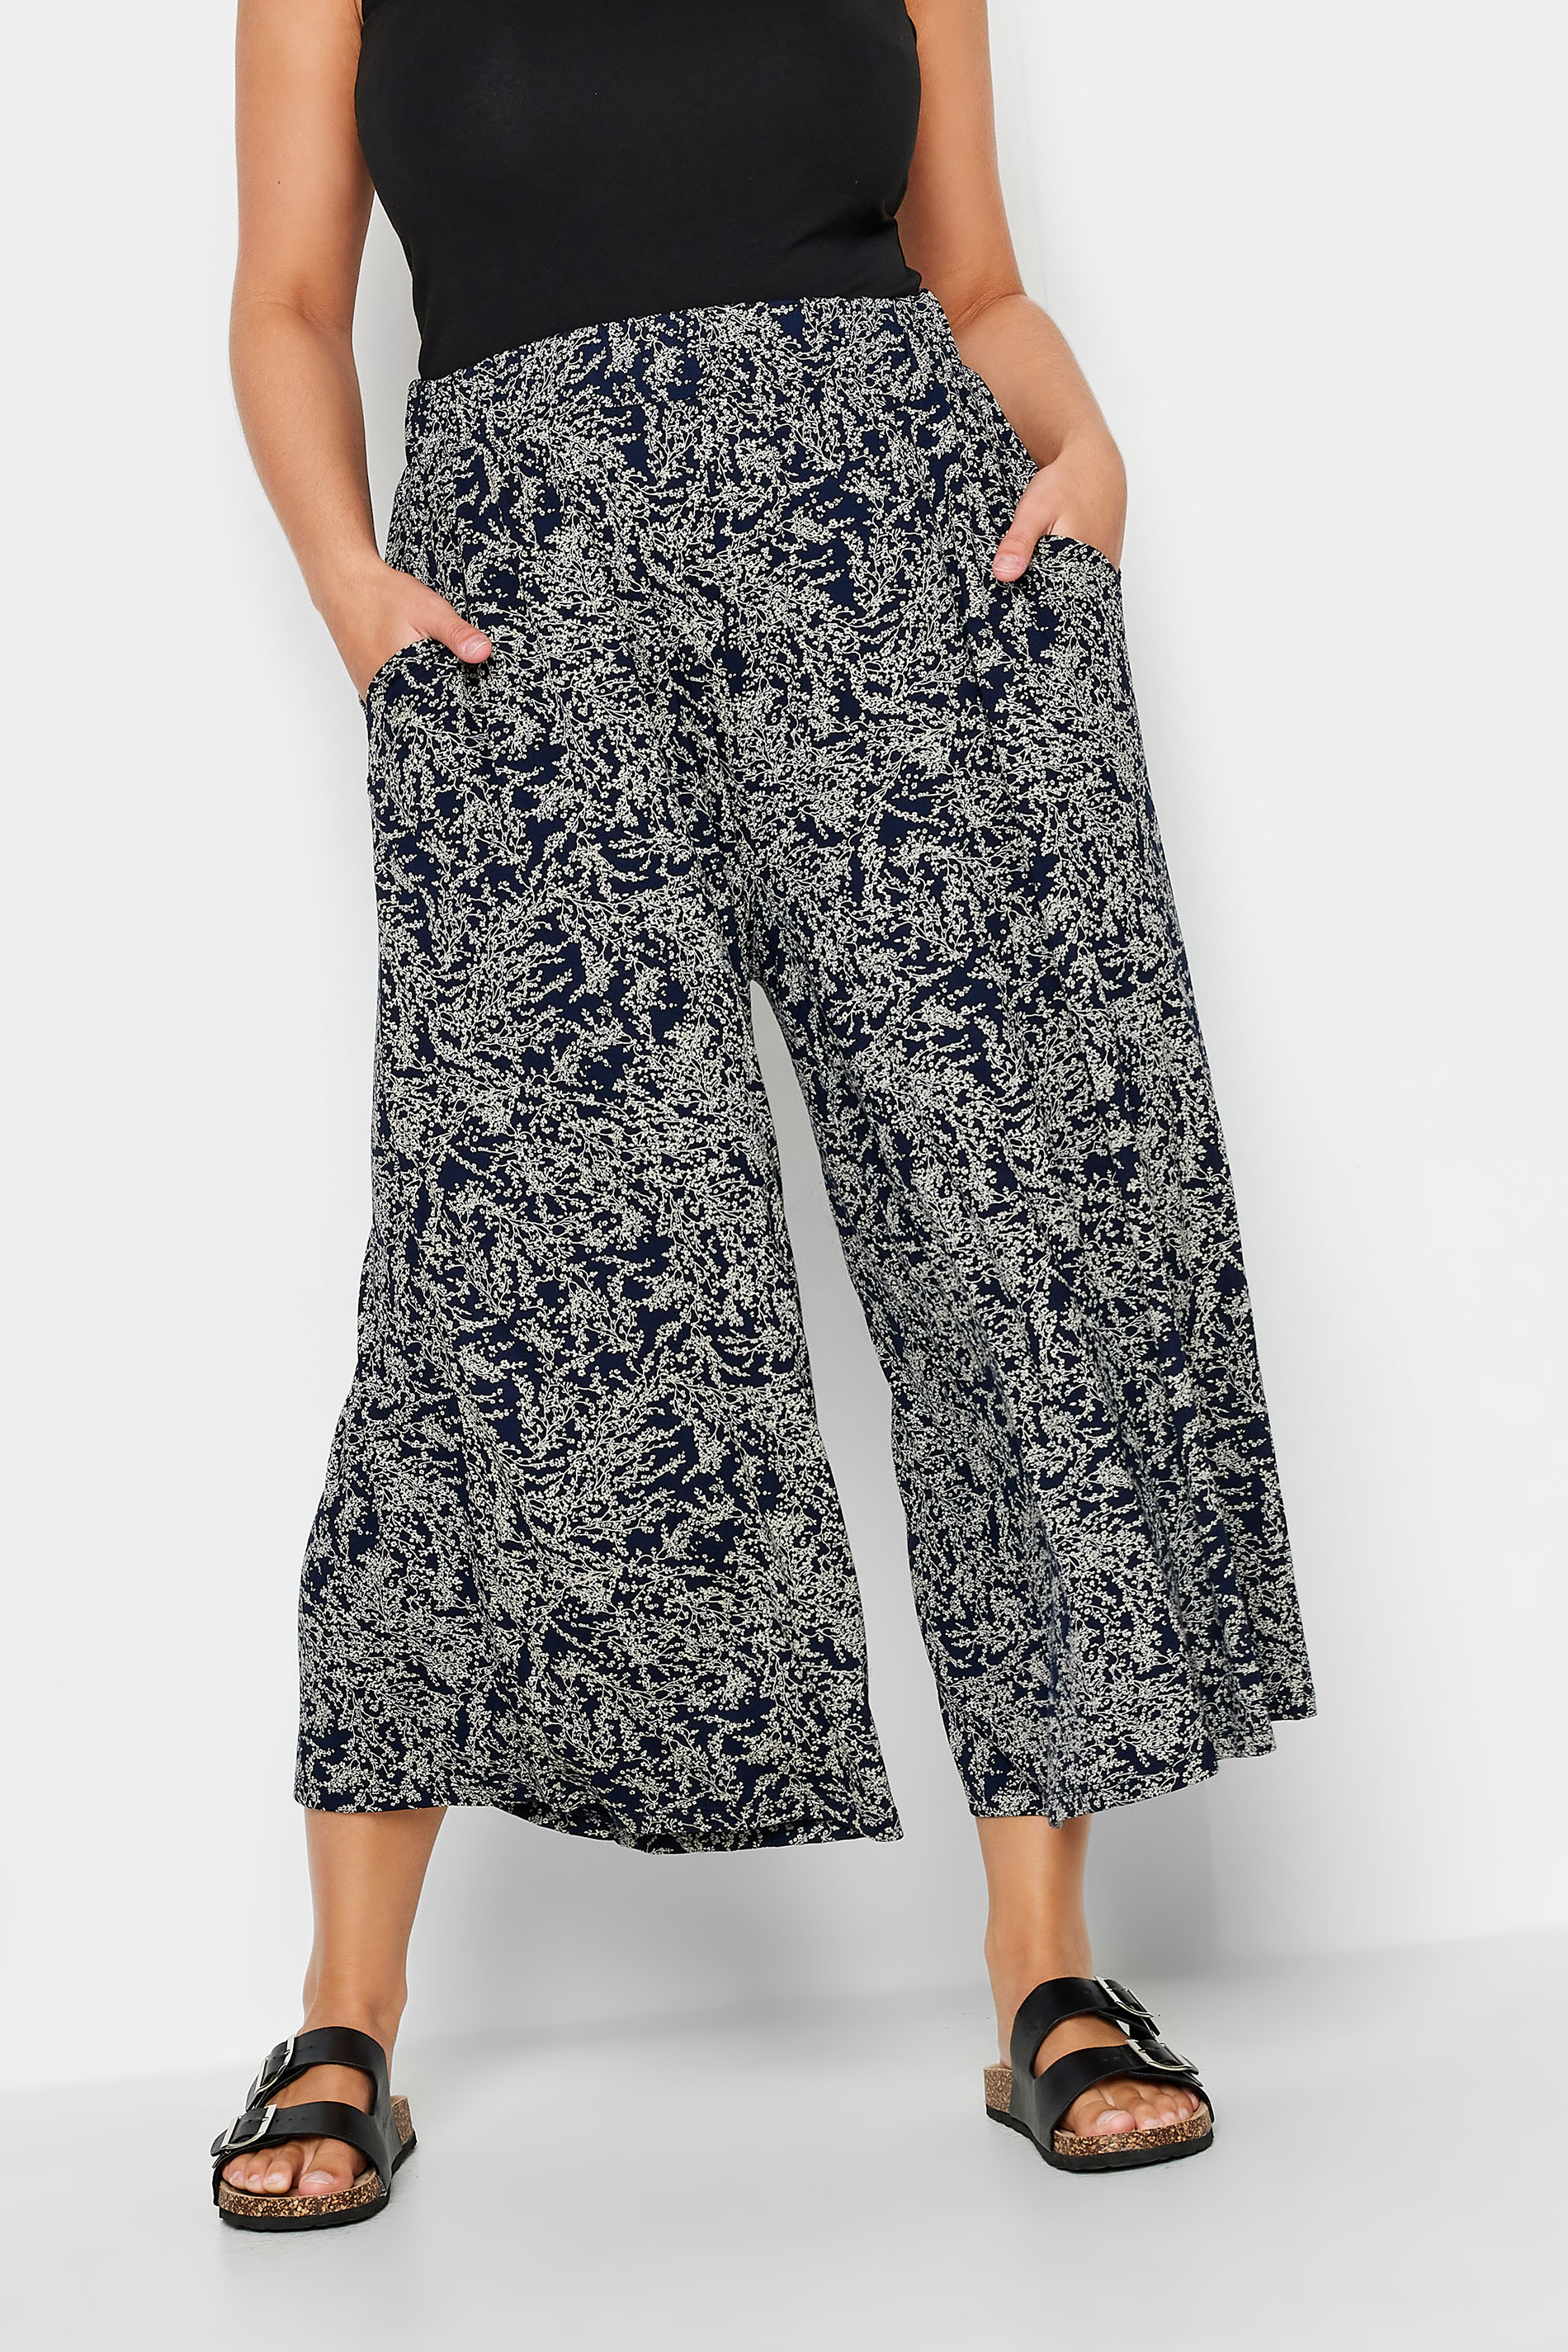 YOURS Plus Size Navy Blue Ditsy Floral Print Midaxi Culottes | Yours Clothing 1